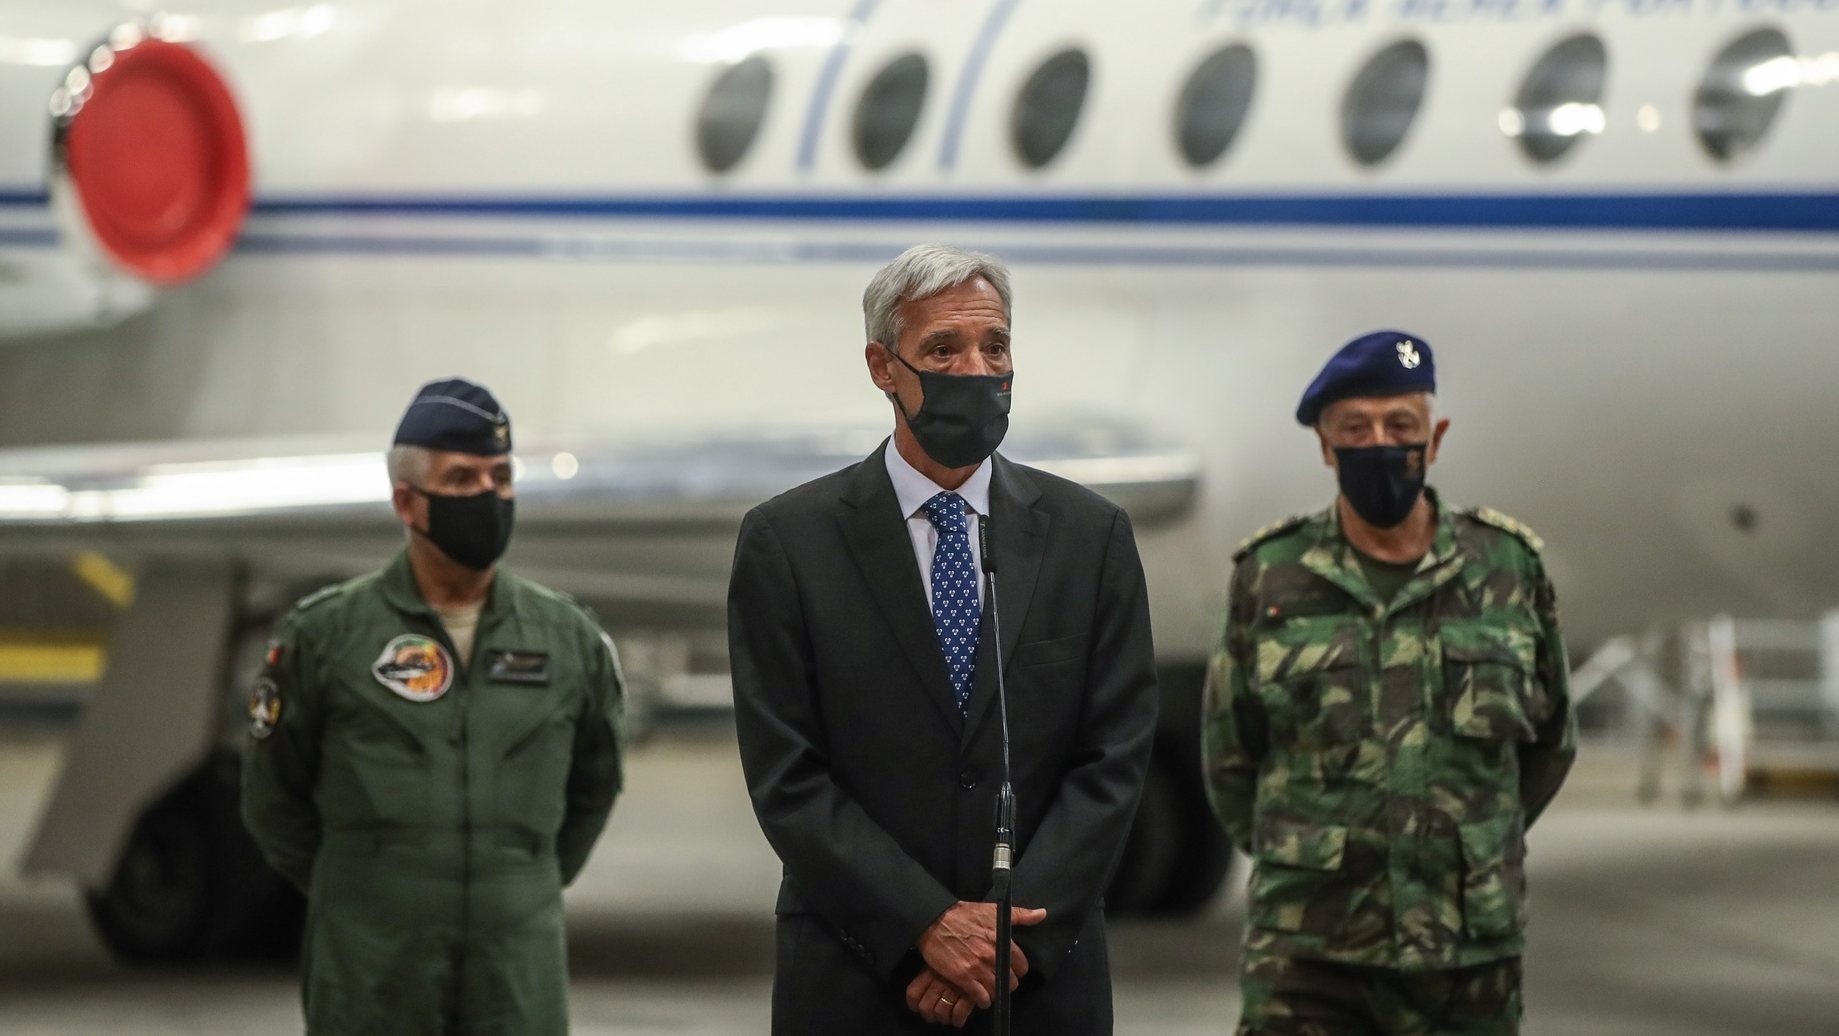 Portugal&#039;s Defense Minister, Joao Gomes Cravinho, during the welcome ceremony of the Portuguese military personnel deployed to support the effort to withdraw Afghan citizens from Kabul and the first group of Afghan citizens who will reside in Portugal, at Figo Maduro airport, in Lisbon, Portugal, 27 August 2021. MARIO CRUZ/LUSA